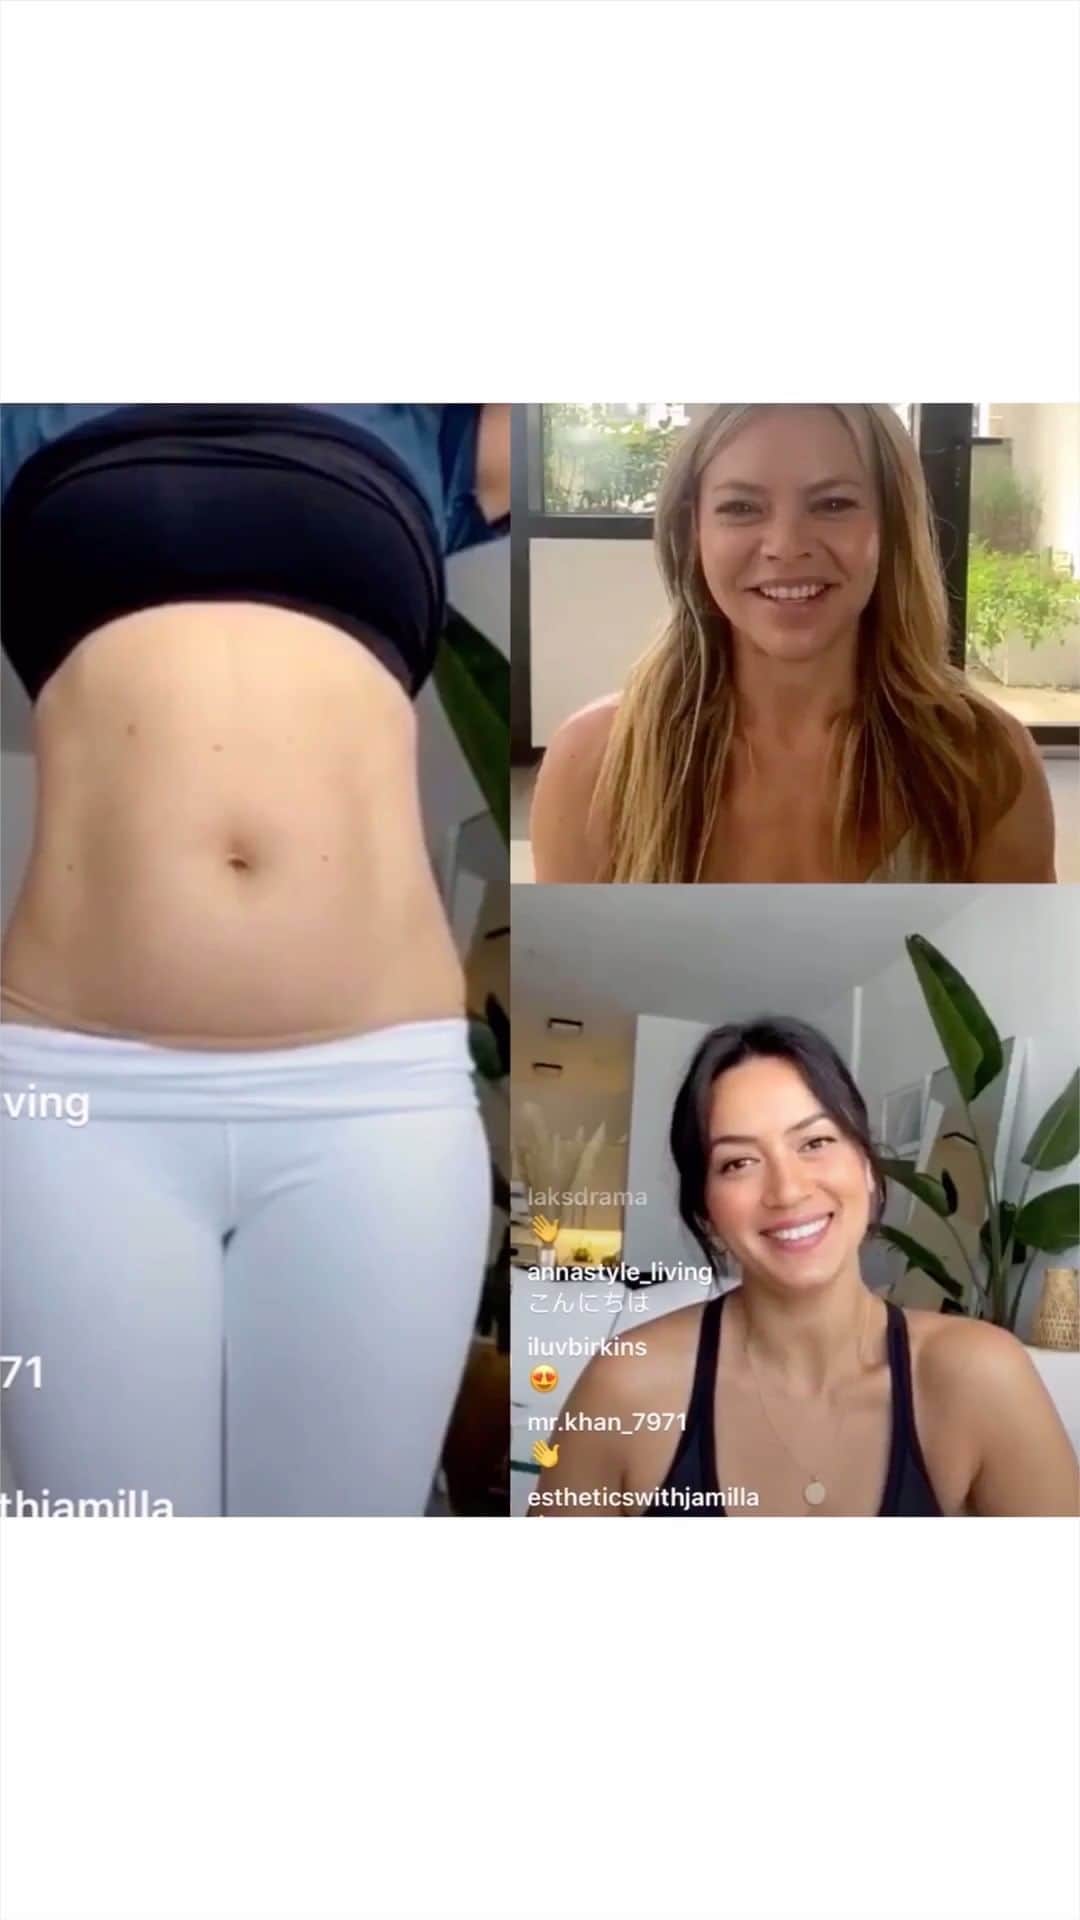 Bianca Cheah Chalmersのインスタグラム：「A lot of mamas have been requesting me to share this virtual session with you all as there isn’t much information out there regarding this. So here it is! I’m so sorry it took so long, you know the deal, motherhood takes all my time these days. In the video, Diastasis Recti specialist Erika (@erikabloompilates) and I discuss what Diastasis Recti is, how to tell if you have it, how to heal it, and how to restore our body postpartum whether you have Diastasis Recti or not.   In regards to MY Diastasis Recti update: I did not get DR (abdominal separation from being pregnant). If you remember, a couple of months ago I was worried about my upper abdomen that protruded outwards that gave me constant back pain... I thought I may have had DR, so I ended up getting help from expert Erika Bloom. Interestingly enough, she diagnosed something completely different with me. Which makes total sense now that I think about it. Anyway, please do watch the video, it’s so INFORMATIVE for everyone. If you have any questions, ask in the comments section and either Erika or I will get back to you.   #diastasisrecti #Diastasisrecti #Diastasisrectirepair #postpartumbody #postpartumjourney #postpartum #postpartumfitness #motherhood #motherhoodunplugged #motherhoodjourney #momlife #mumlife #mums #mum #csection」